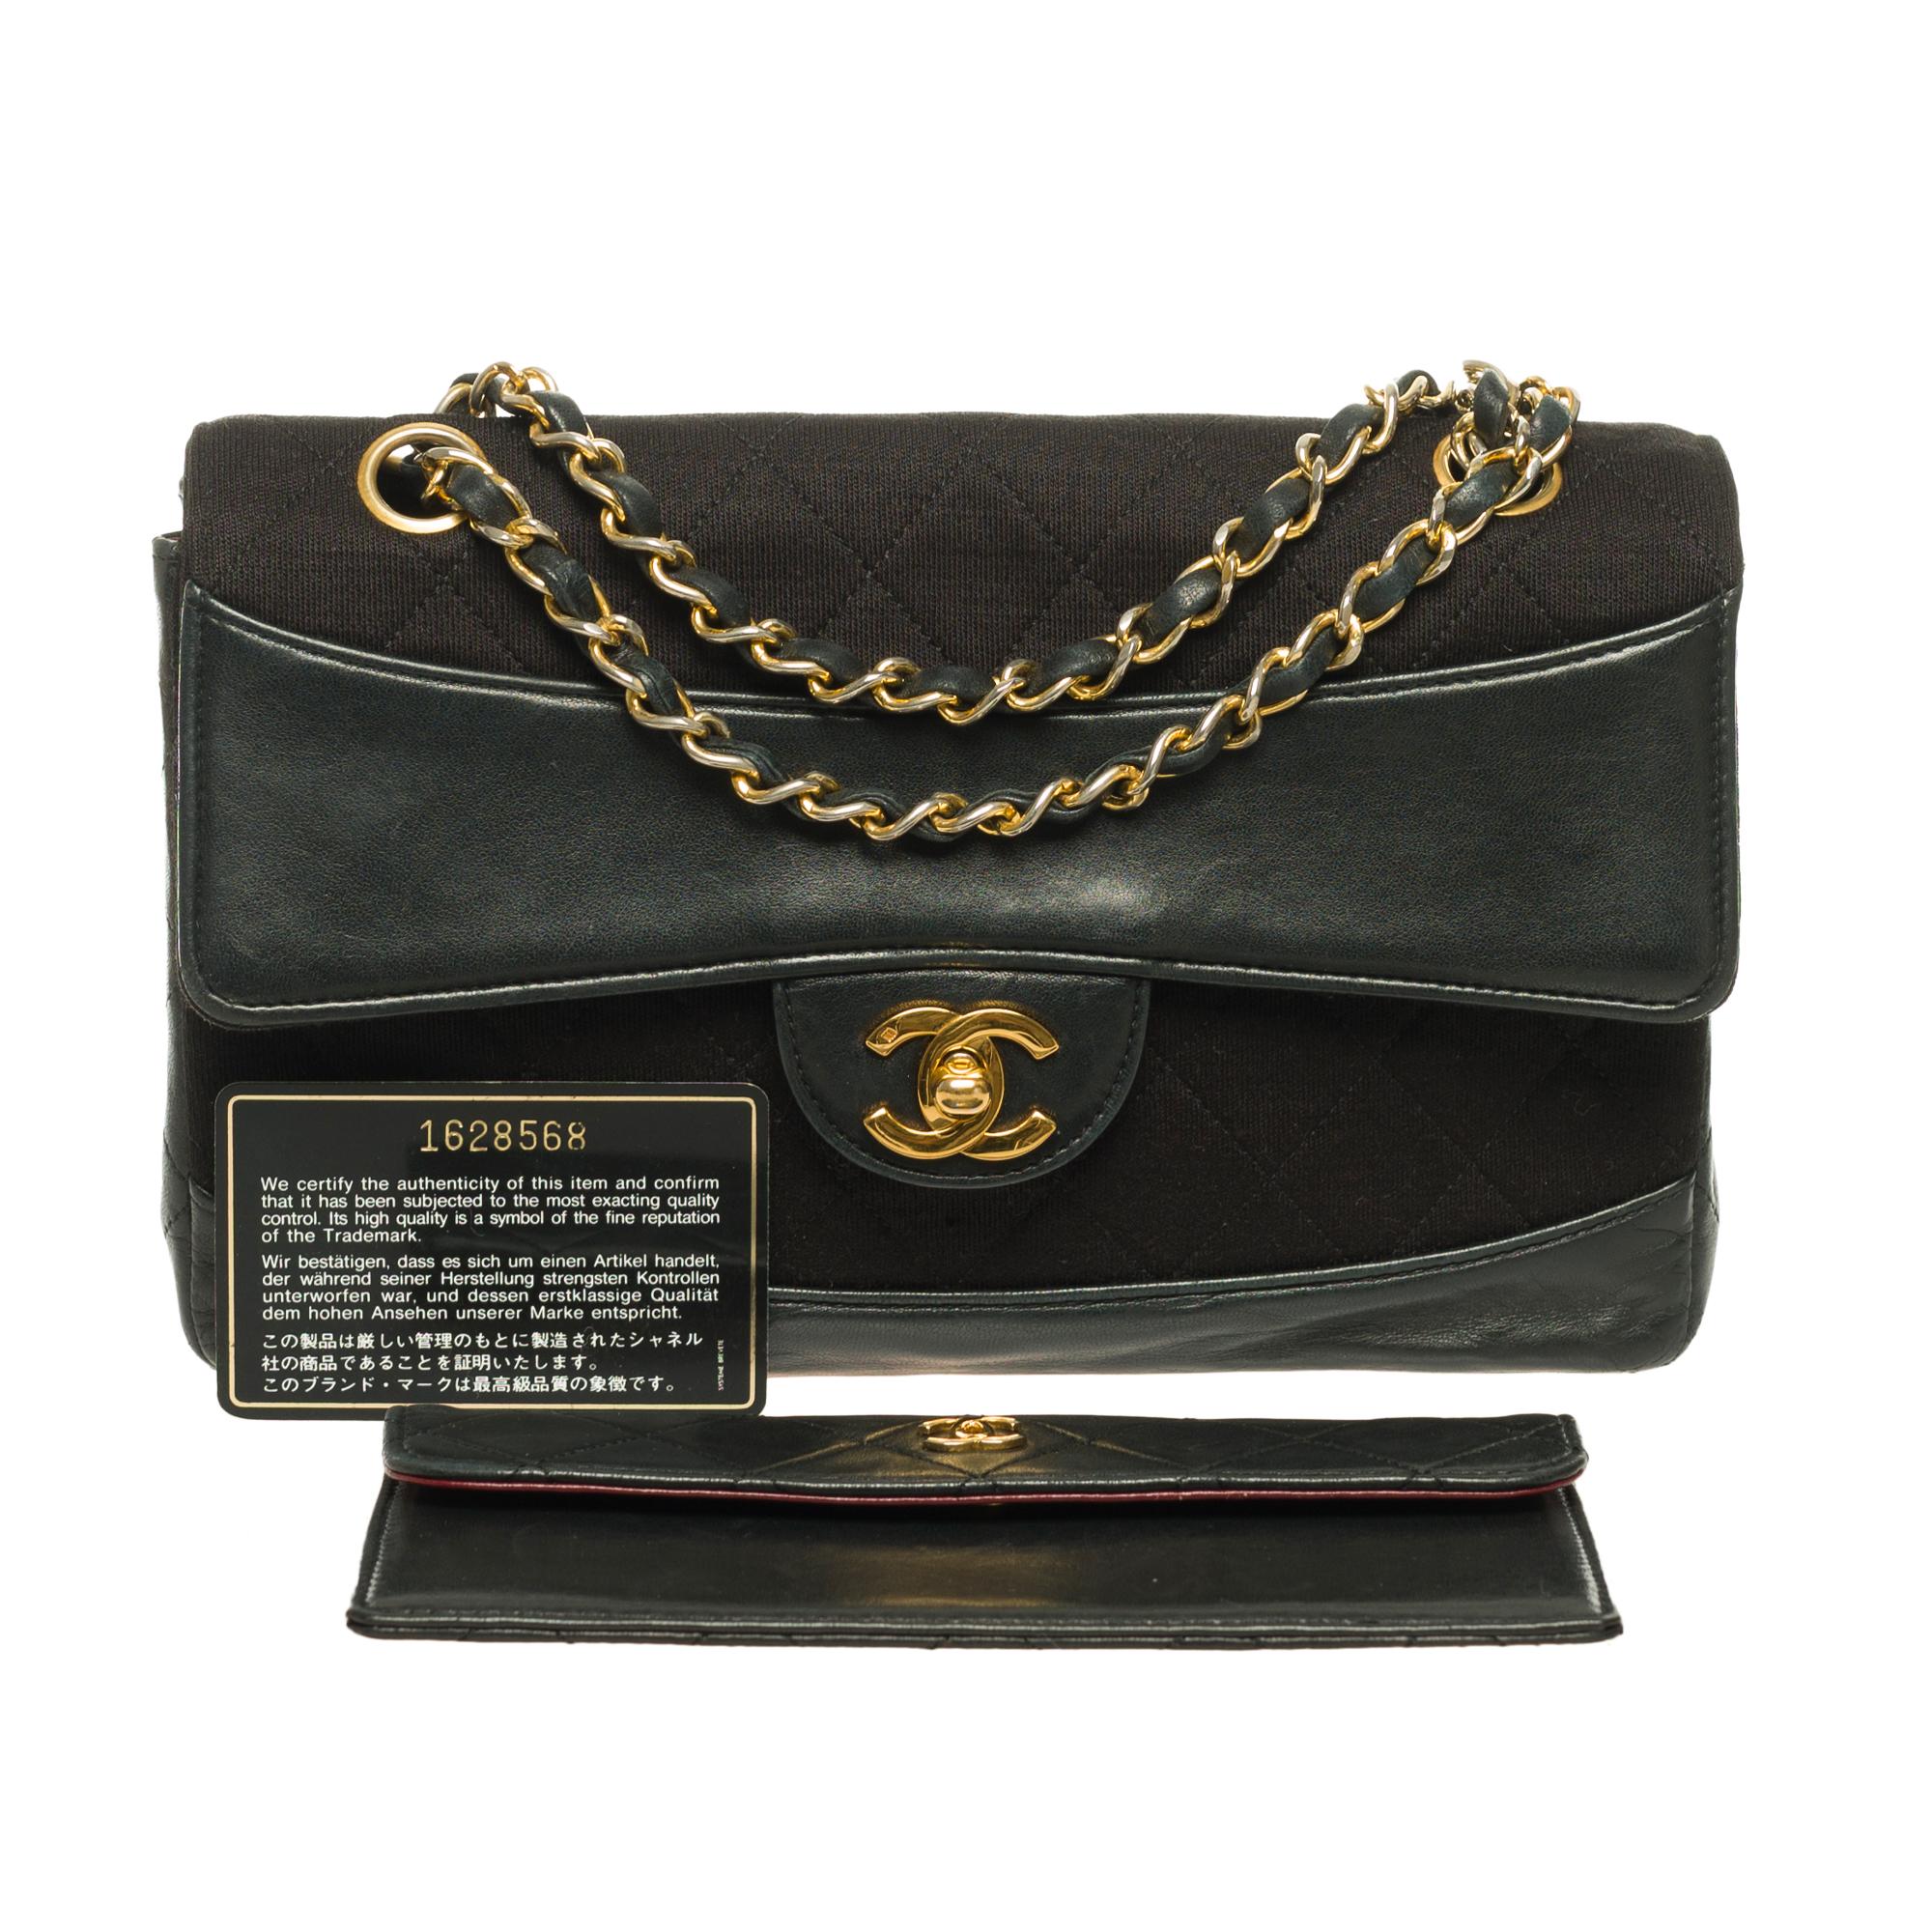 Amazing Chanel Classic bi material crossbody bag in black leather& Jersey, GHW 6